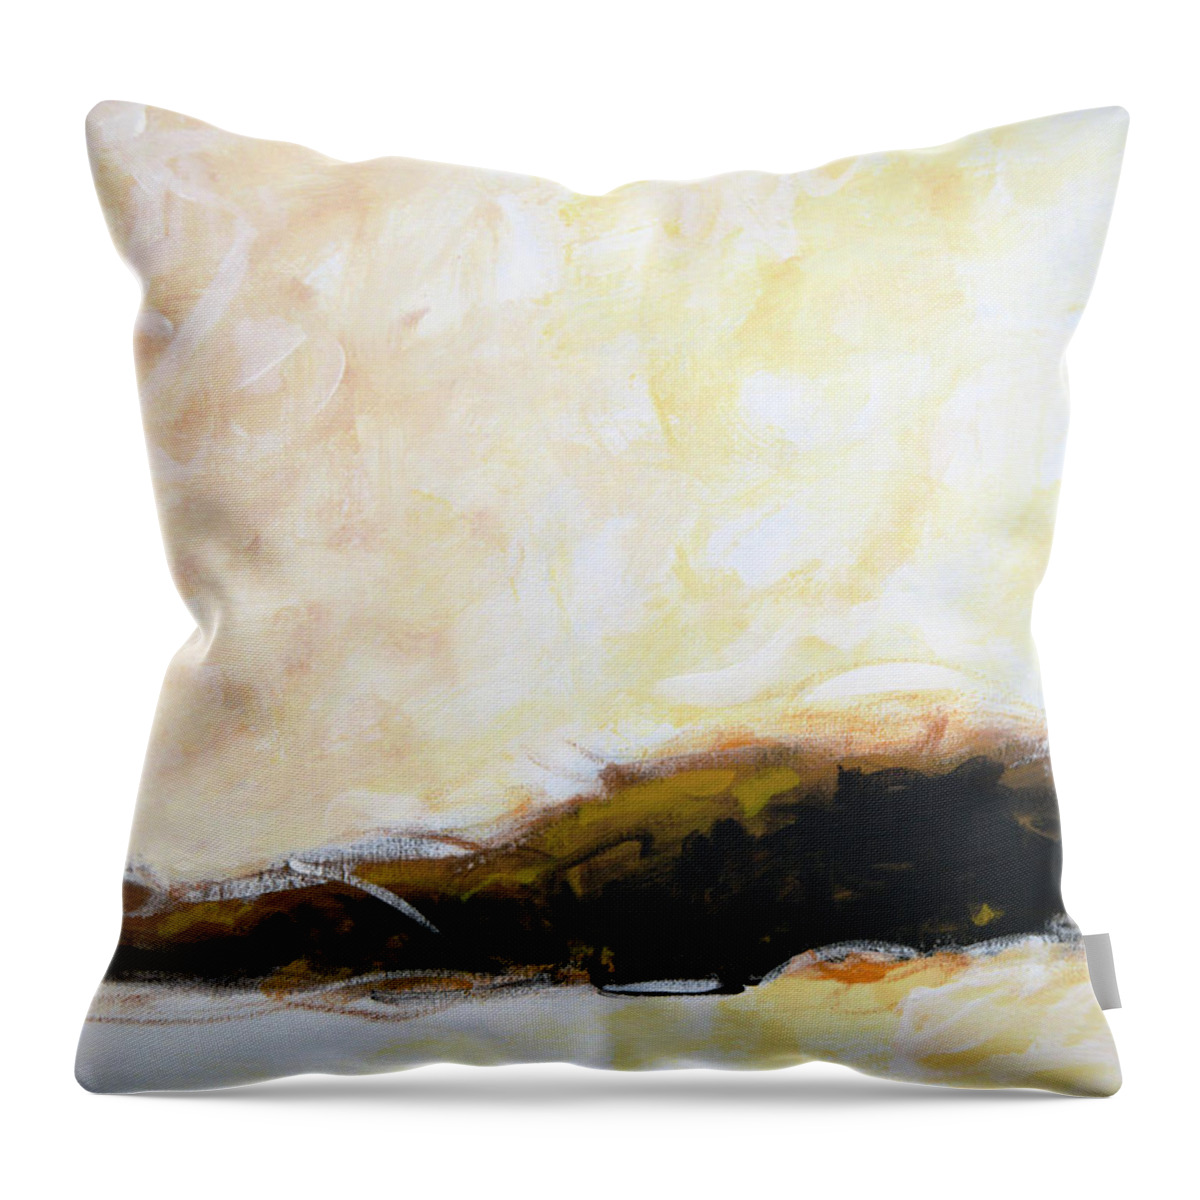 Abstract Art Throw Pillow featuring the painting Balance by Amy Giacomelli